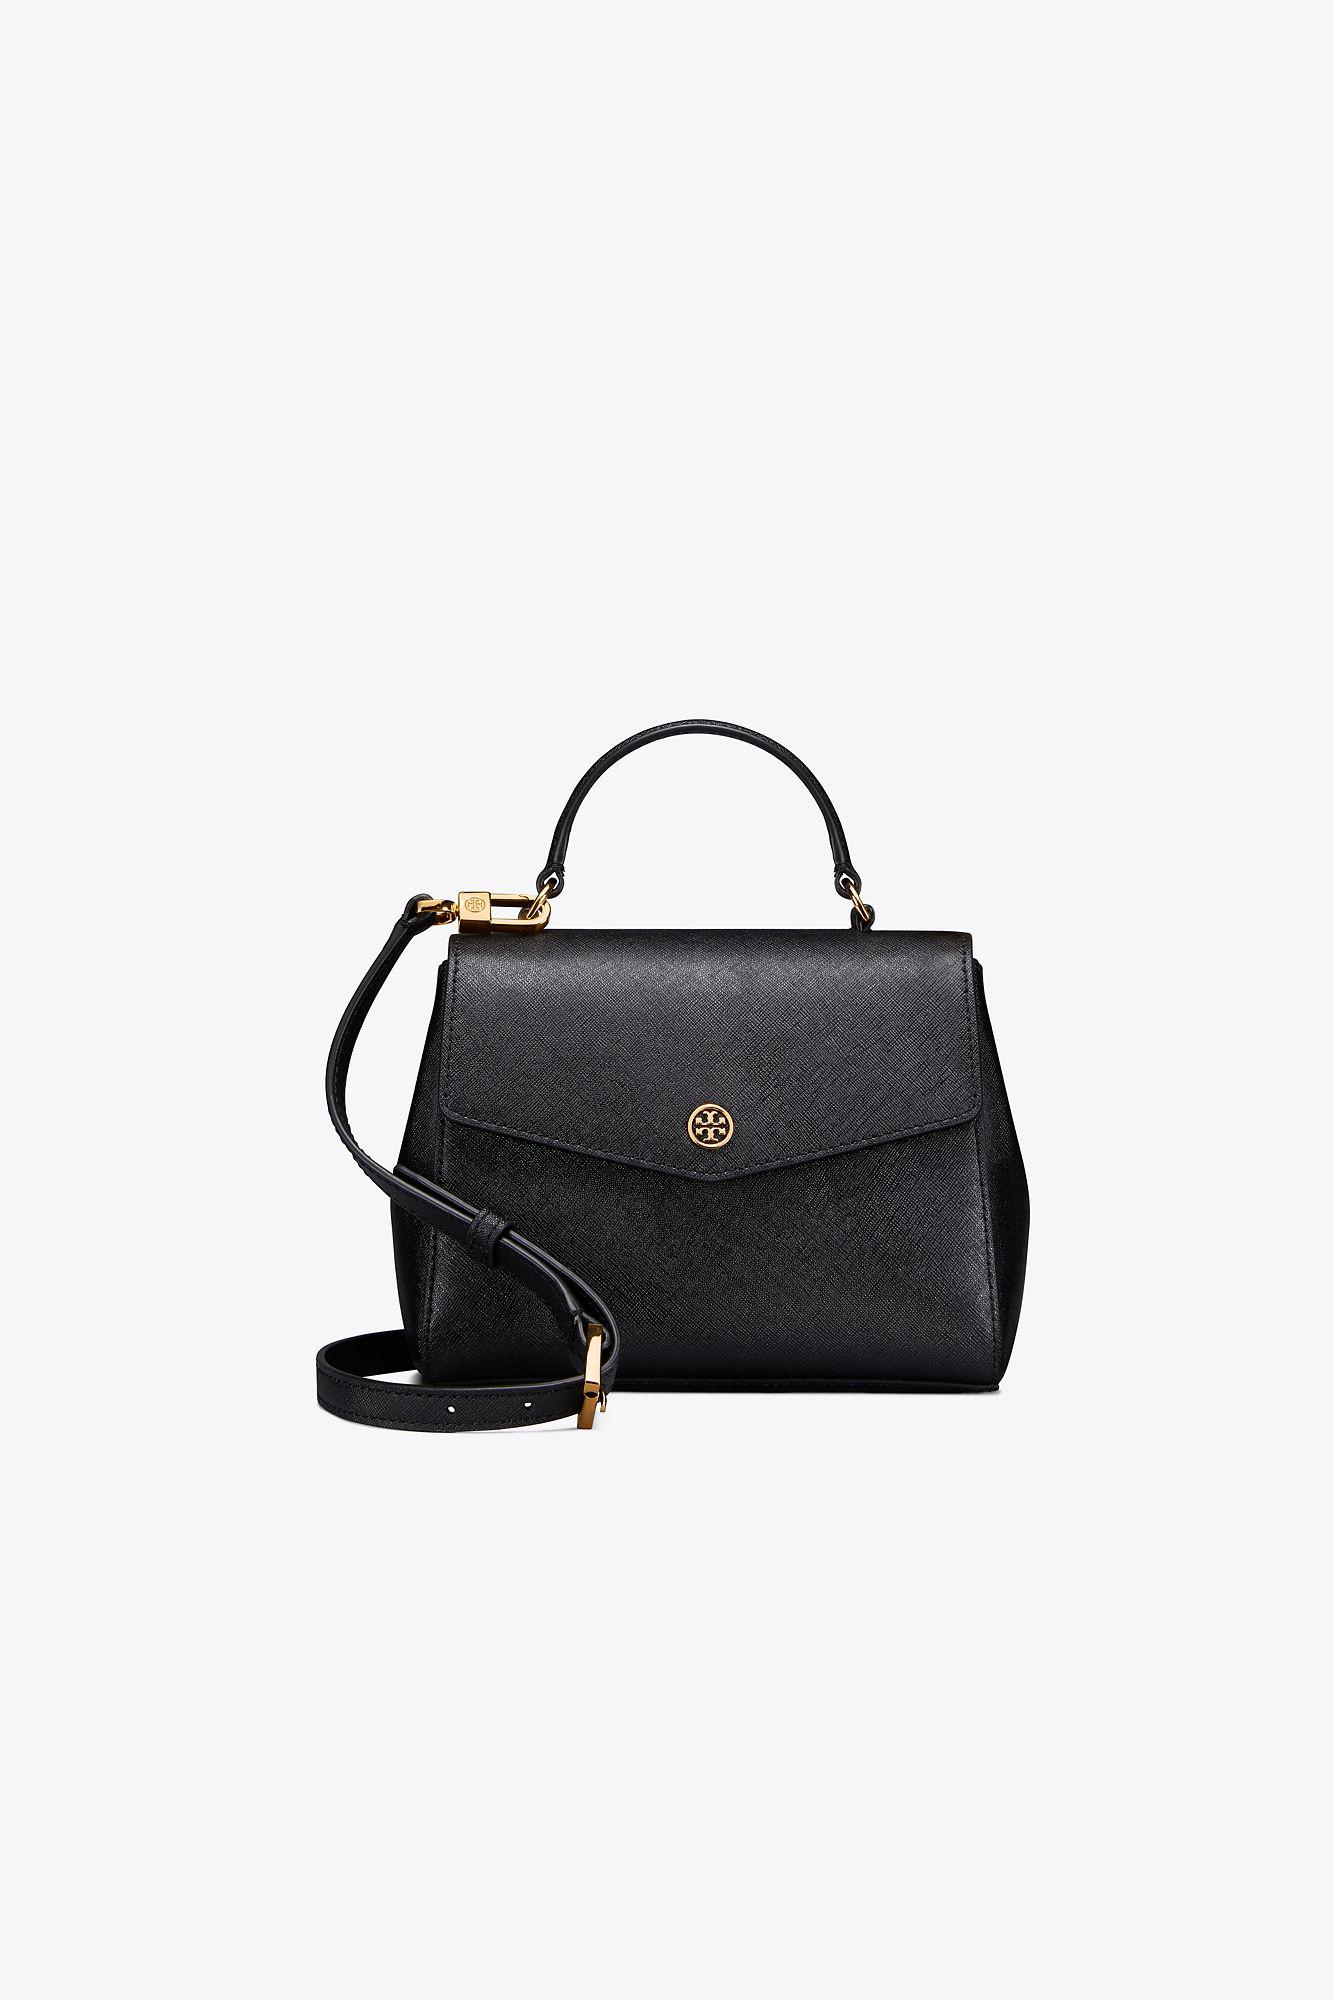 Lyst - Tory Burch Robinson Small Top-handle Satchel in Black - Save 1.9718309859154886%